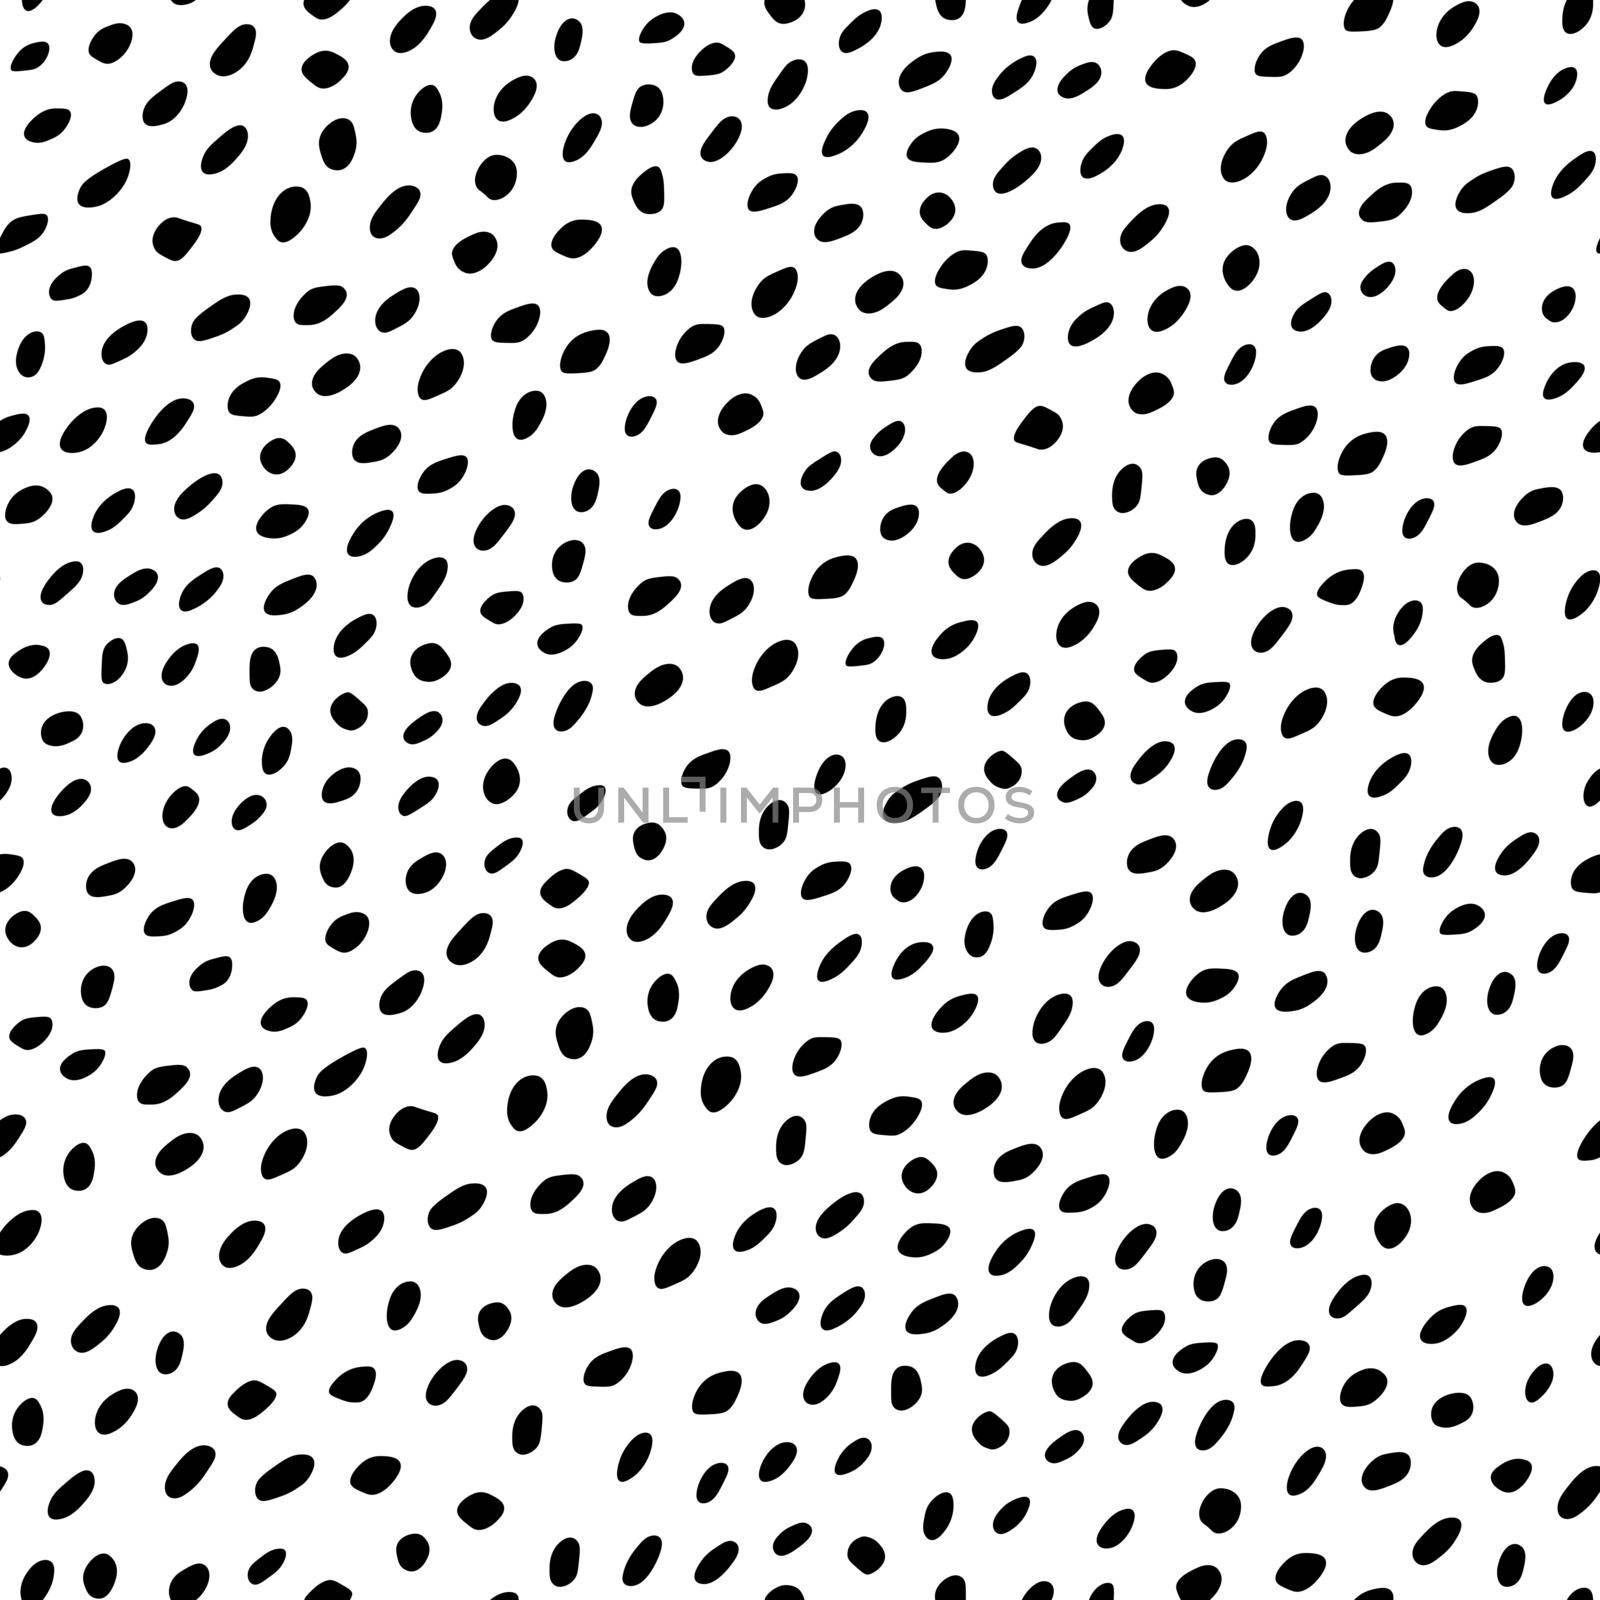 Abstract black and white background. Seamless pattern with animals print for wallpaper, web page, textures, card, postcard, faric, textile. Ornament of stylized skin. Decorative vector illustration